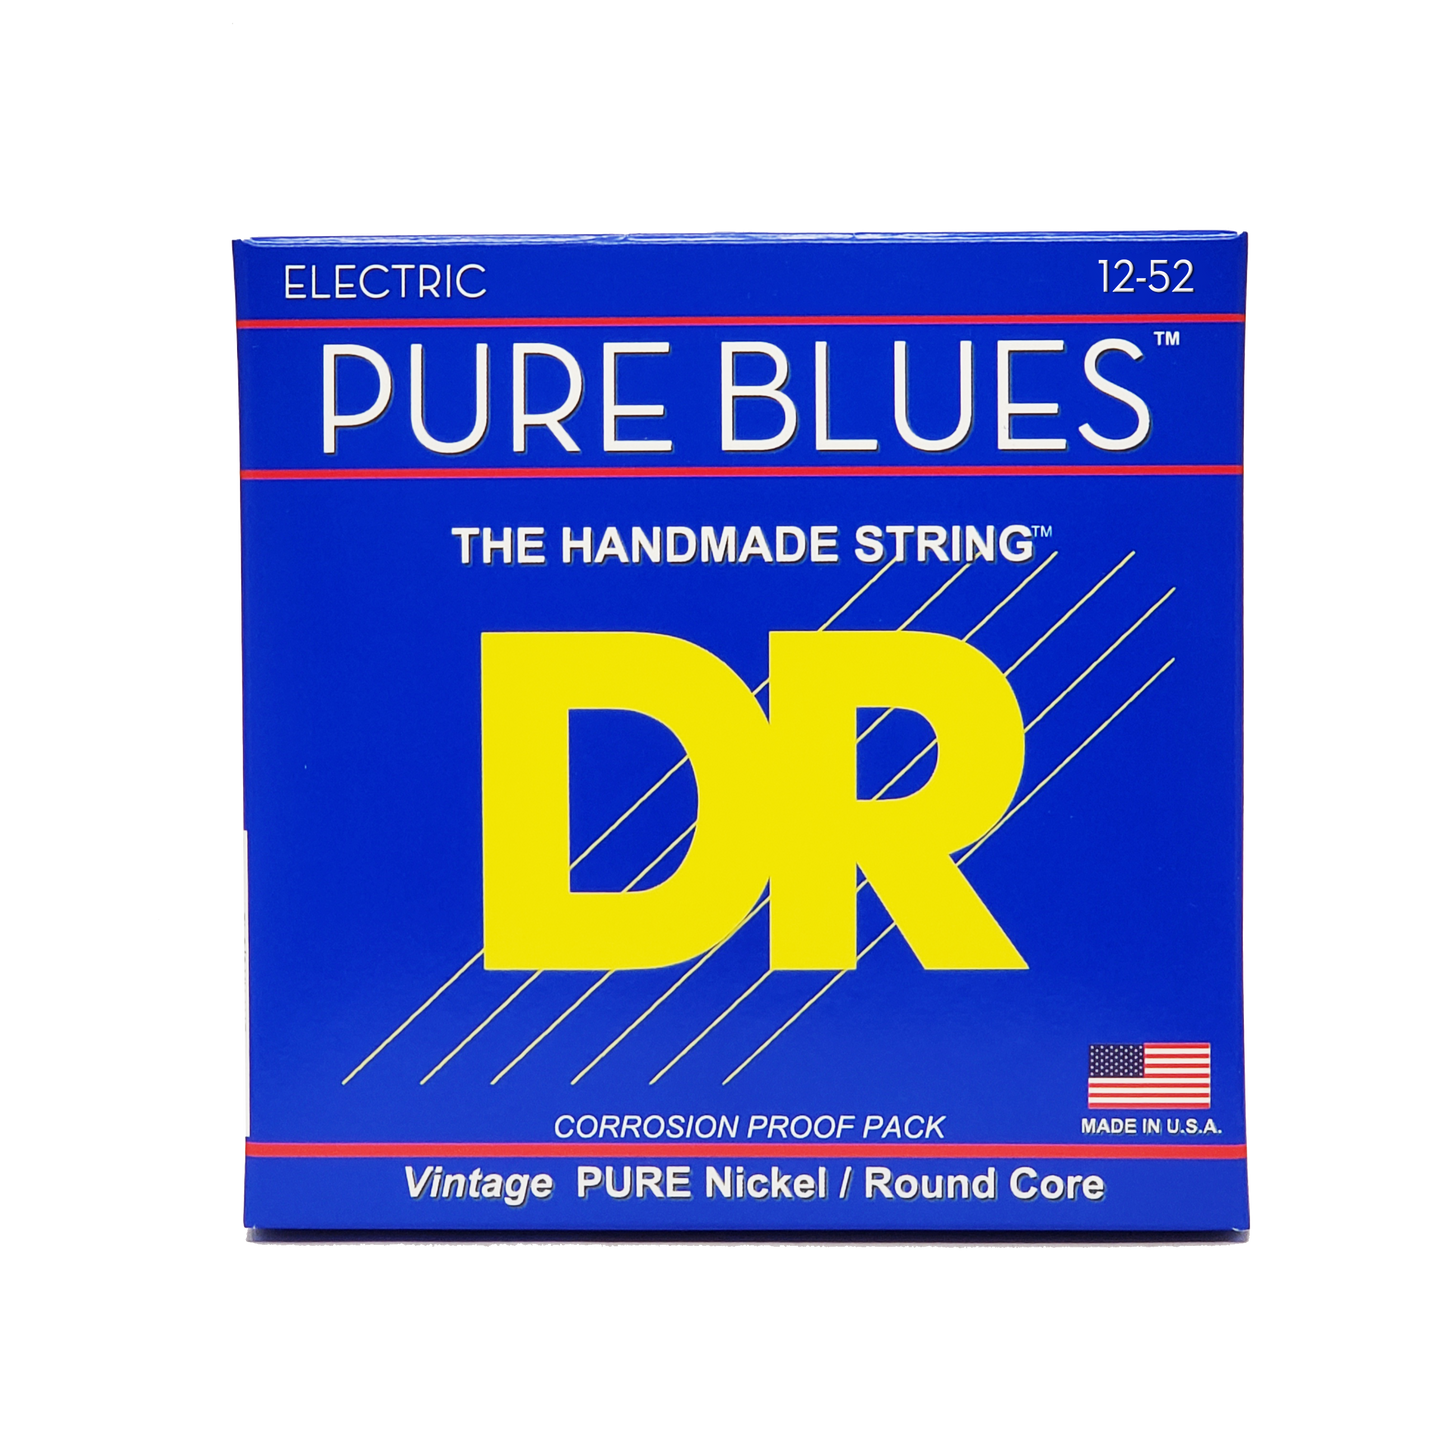 DR Strings DR Pure Blues Pure Nickel Electric Guitar String Set - 12-52 Jazz Wound 3rd PHR-12